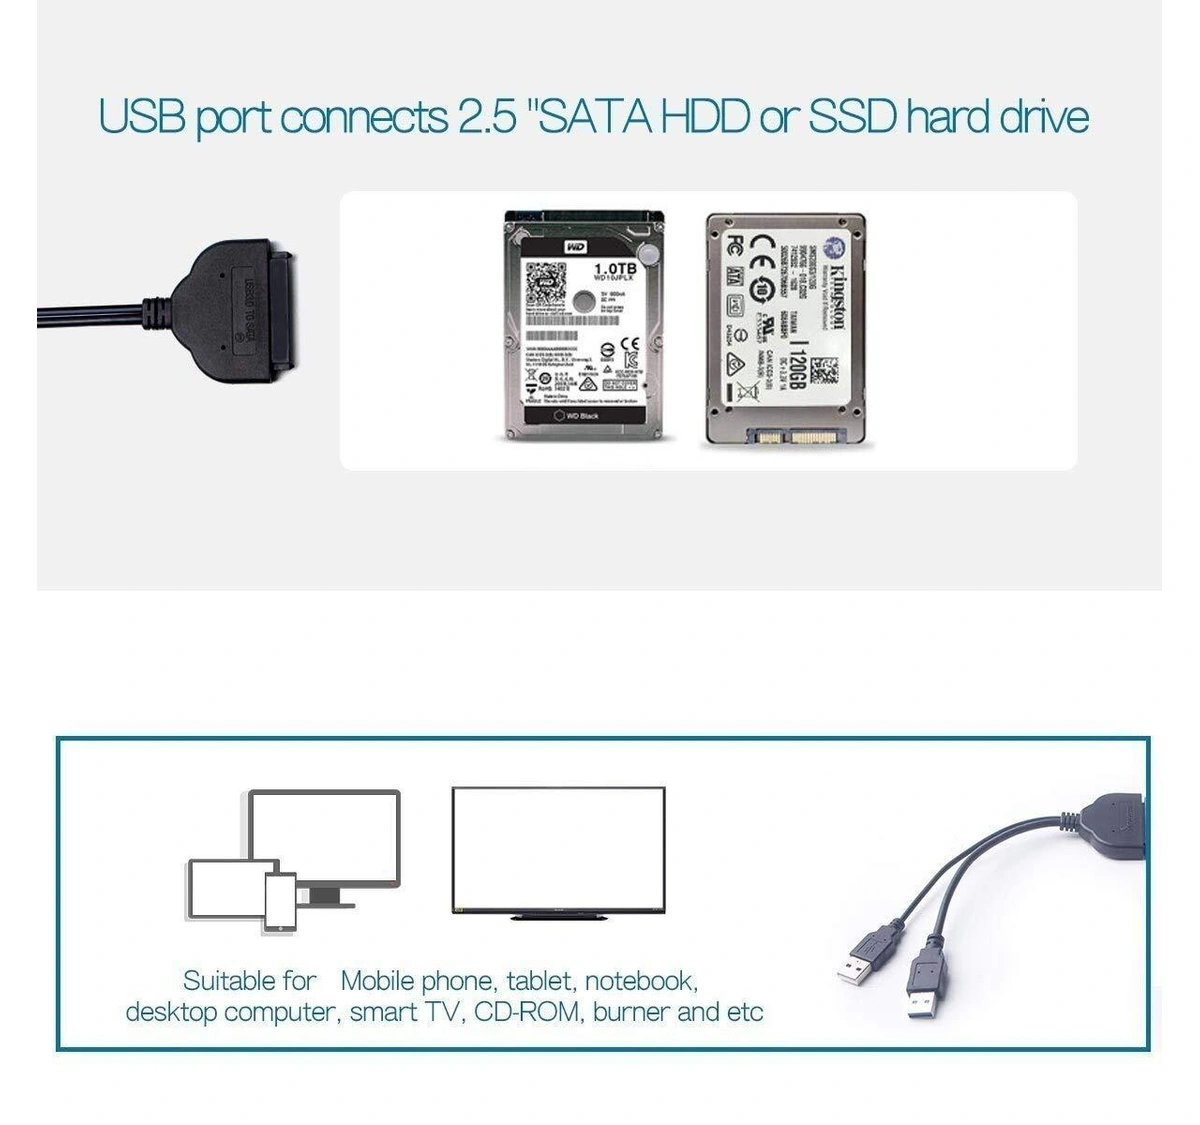 Does SATA III to USB 3.0 cable slow down a SSD significantly